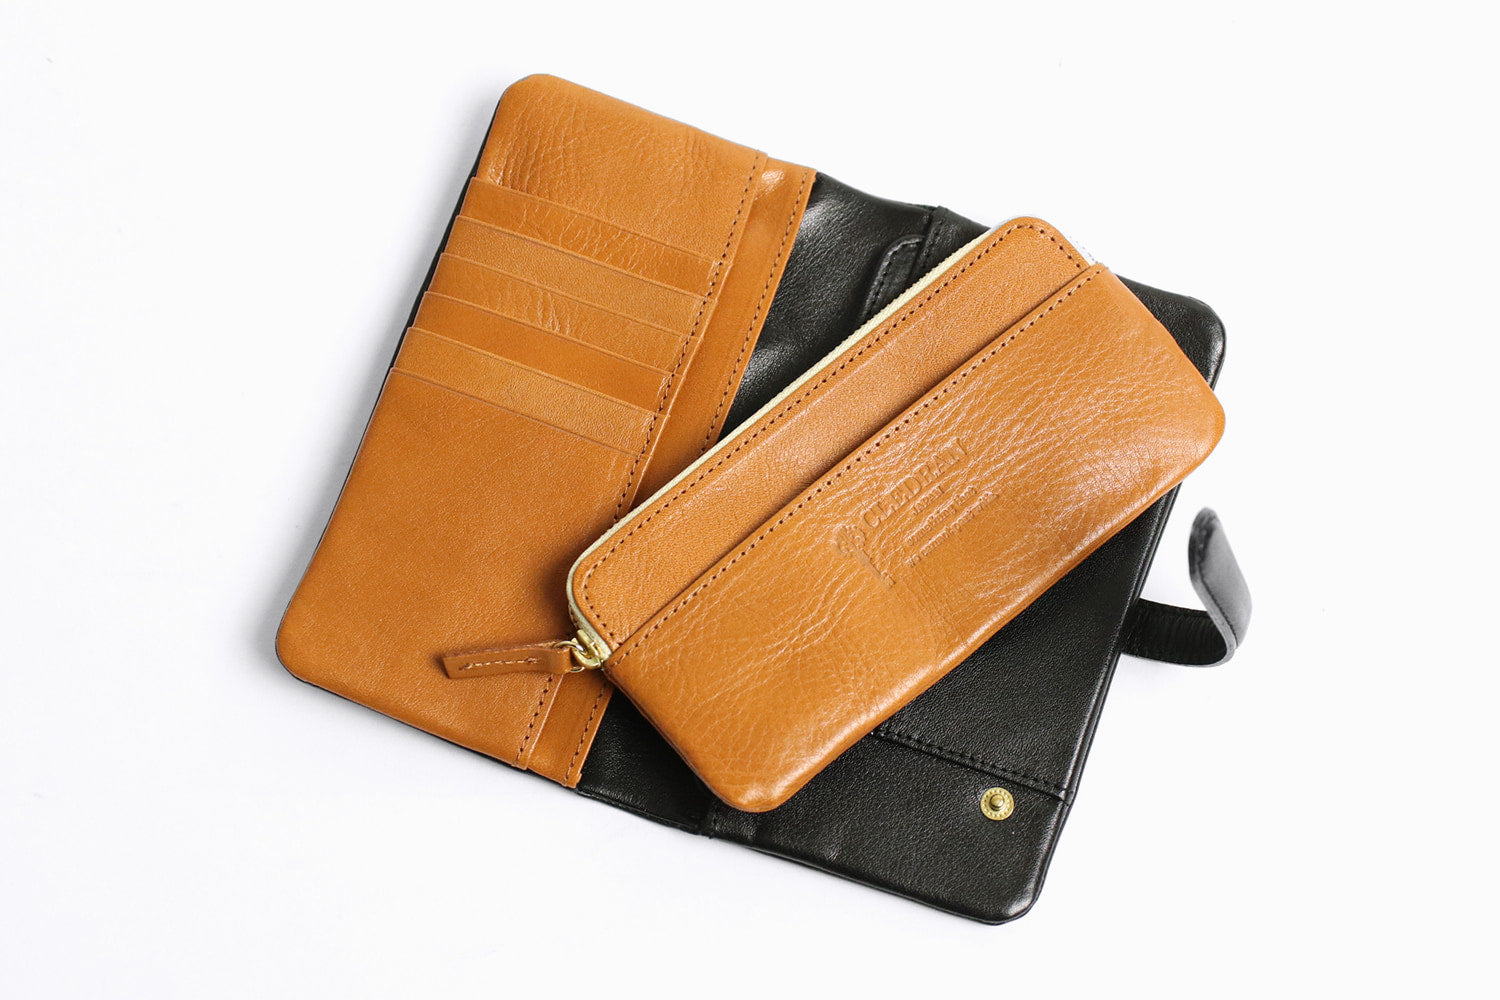 CLEDRAN Adre Plump form Functional long wallet made of cowhide leather 